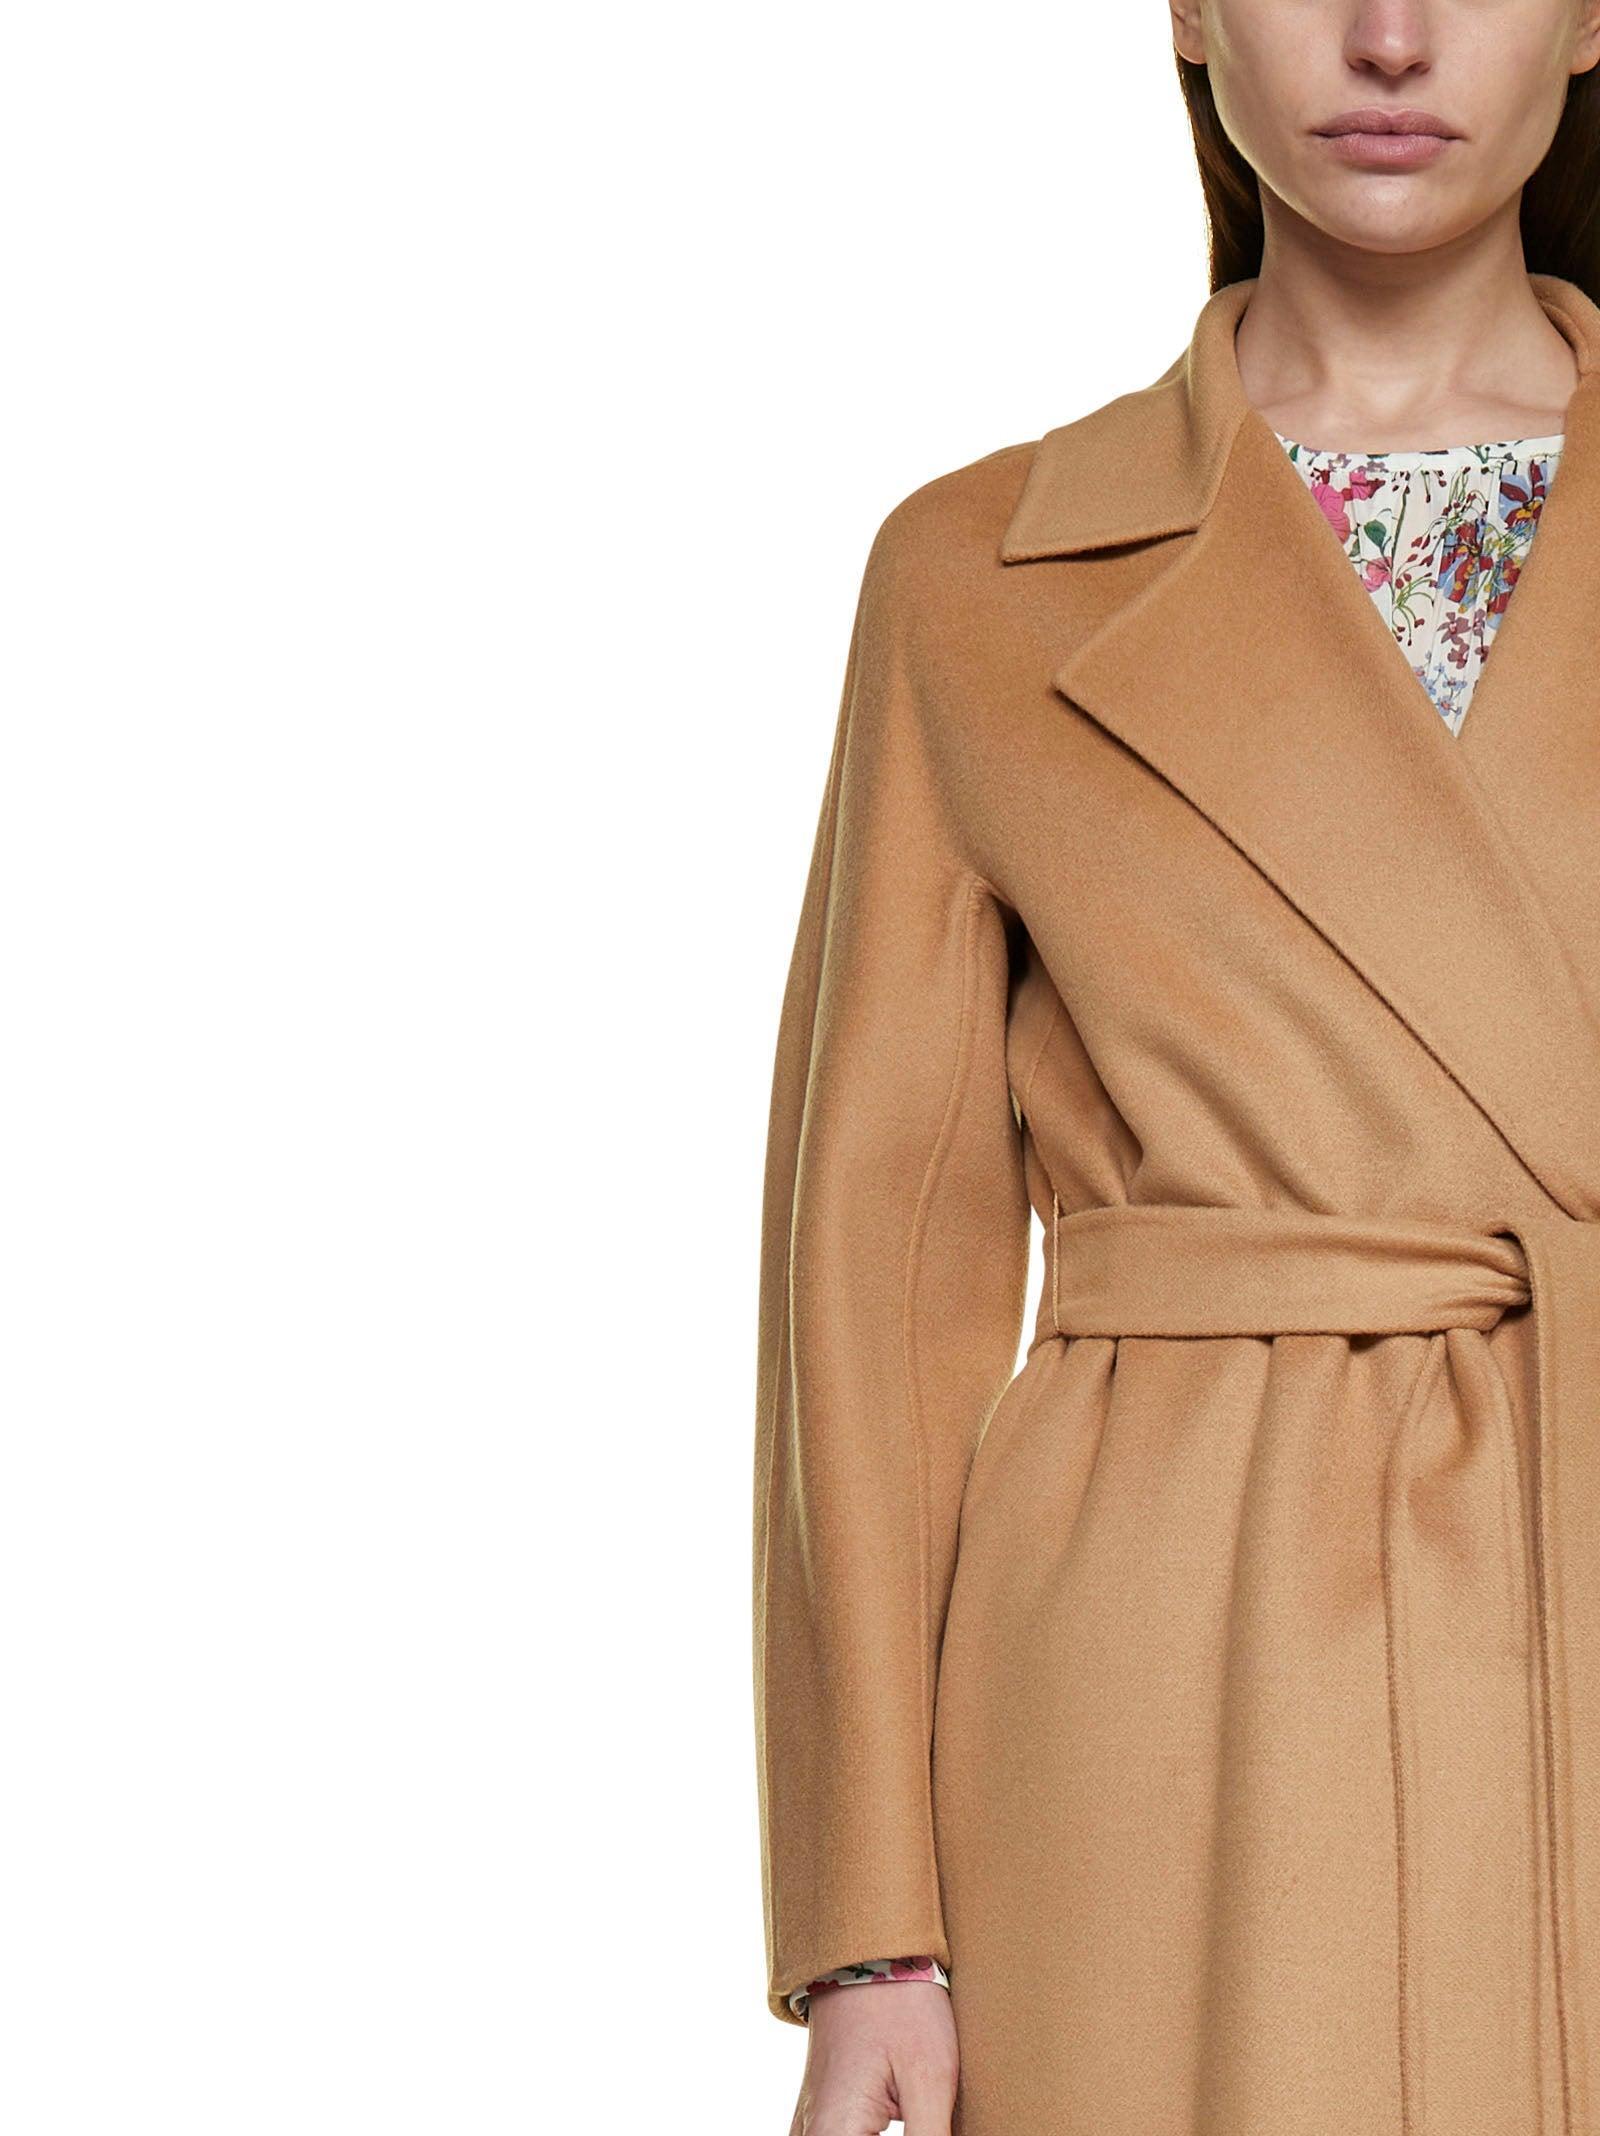 Max Mara Studio Cles Wool, Cashmere And Silk Coat in Natural | Lyst